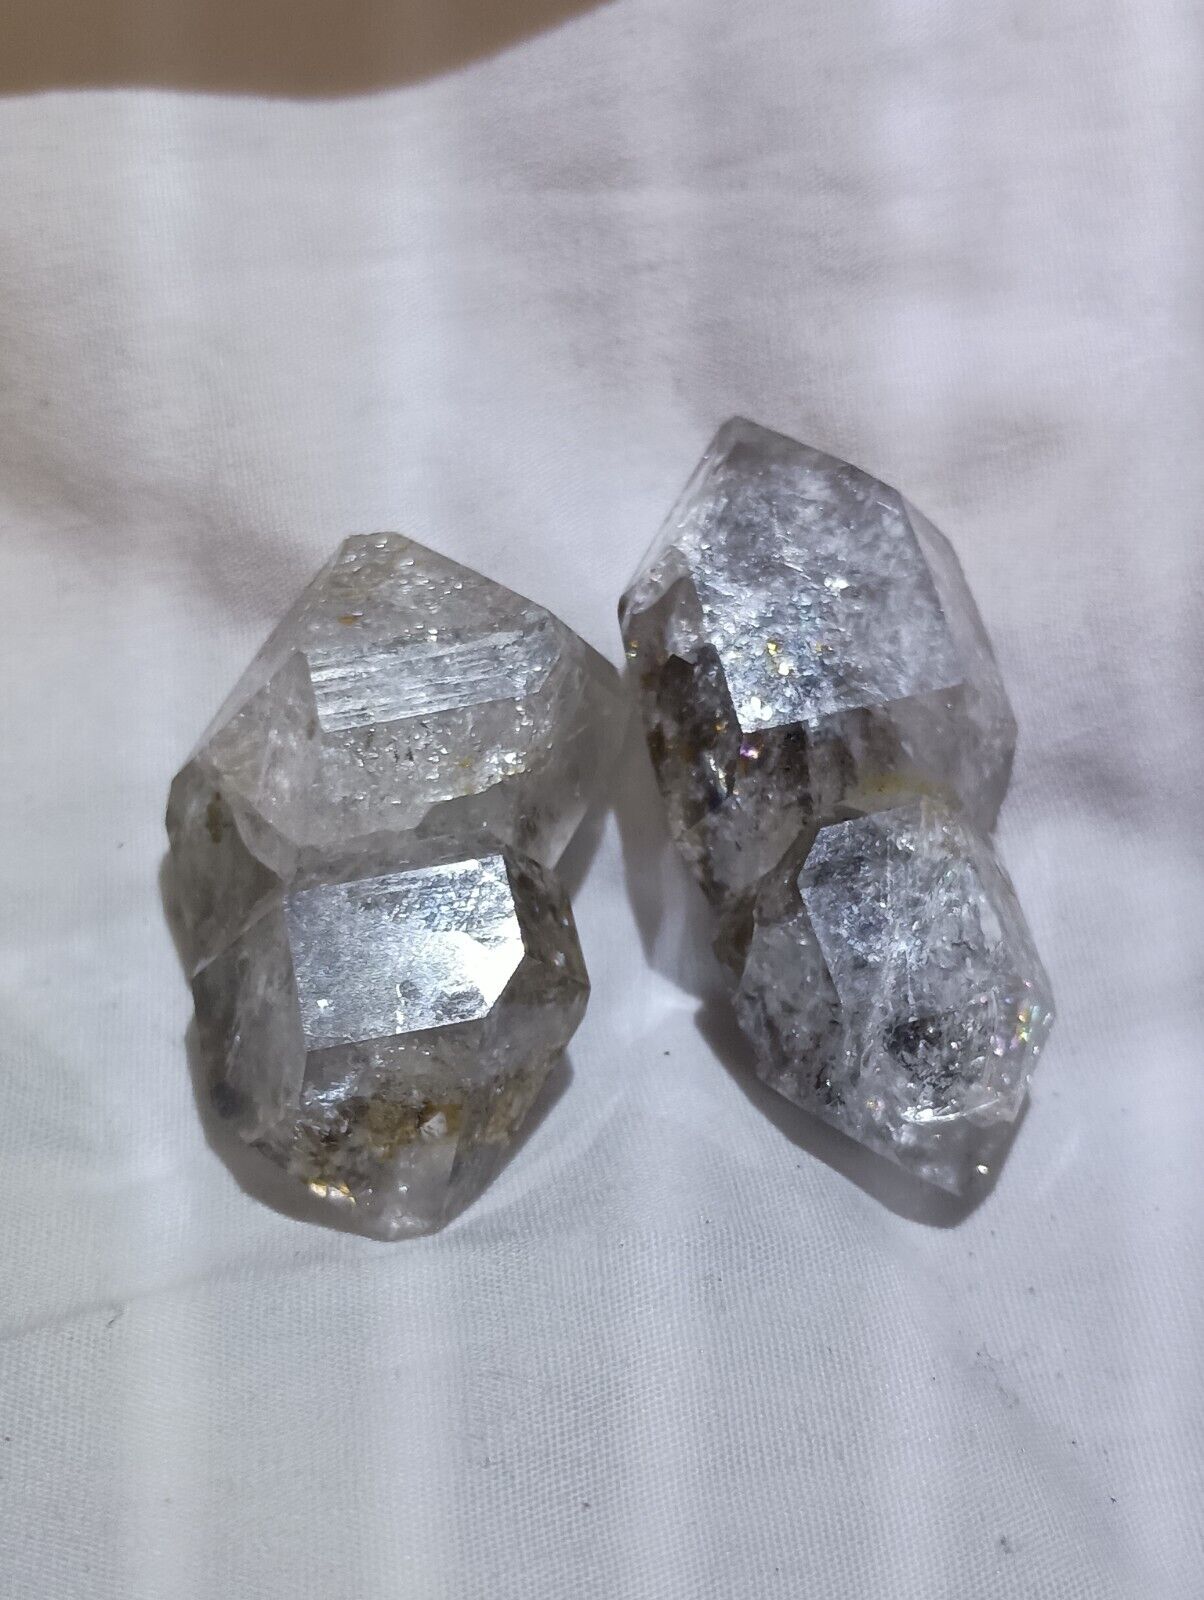  Sale    Genuine Herkimer 💎s (Lot Of 2 Rare Crystals) 🔥